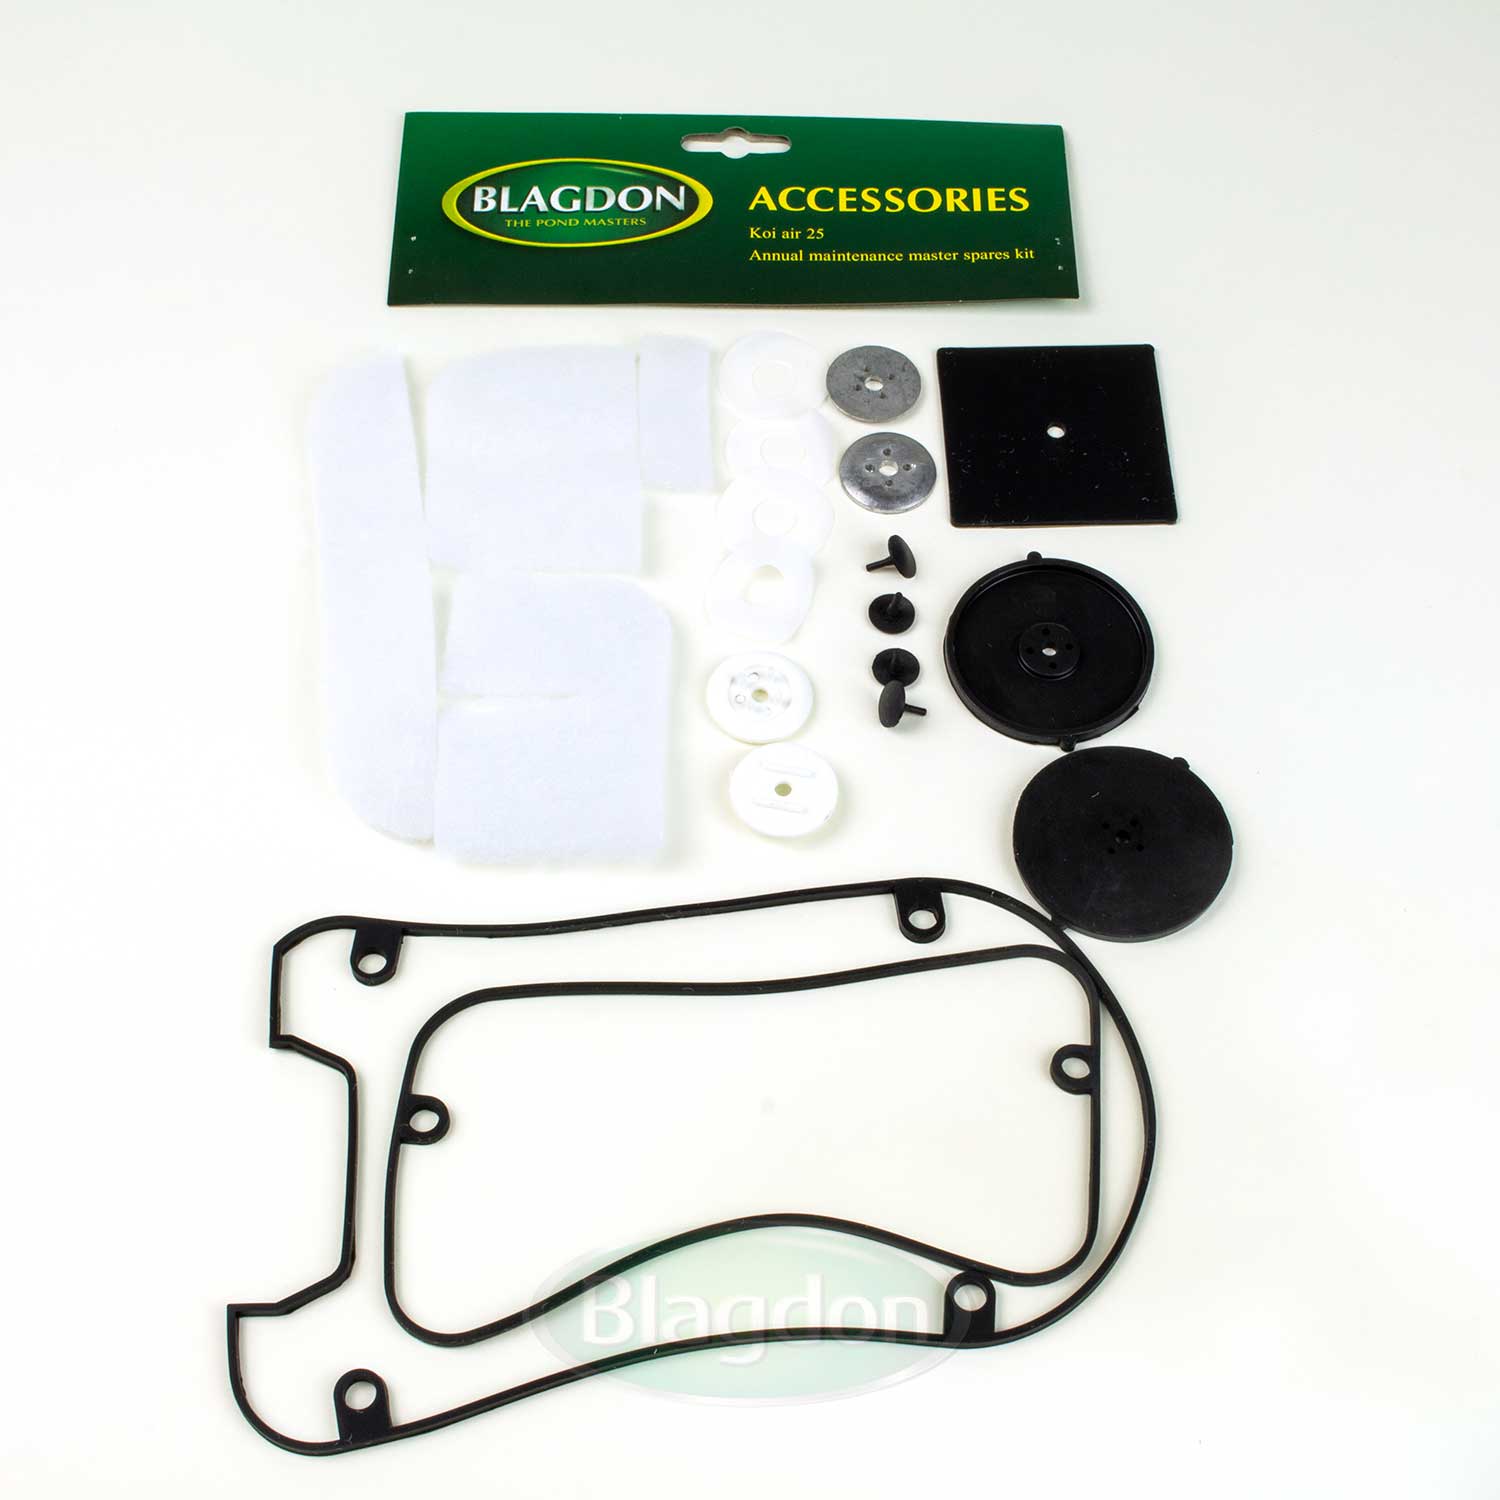 1019941 Blagdon Complete Annual Maintenance Kit for the Koi Air Pump Model 25 